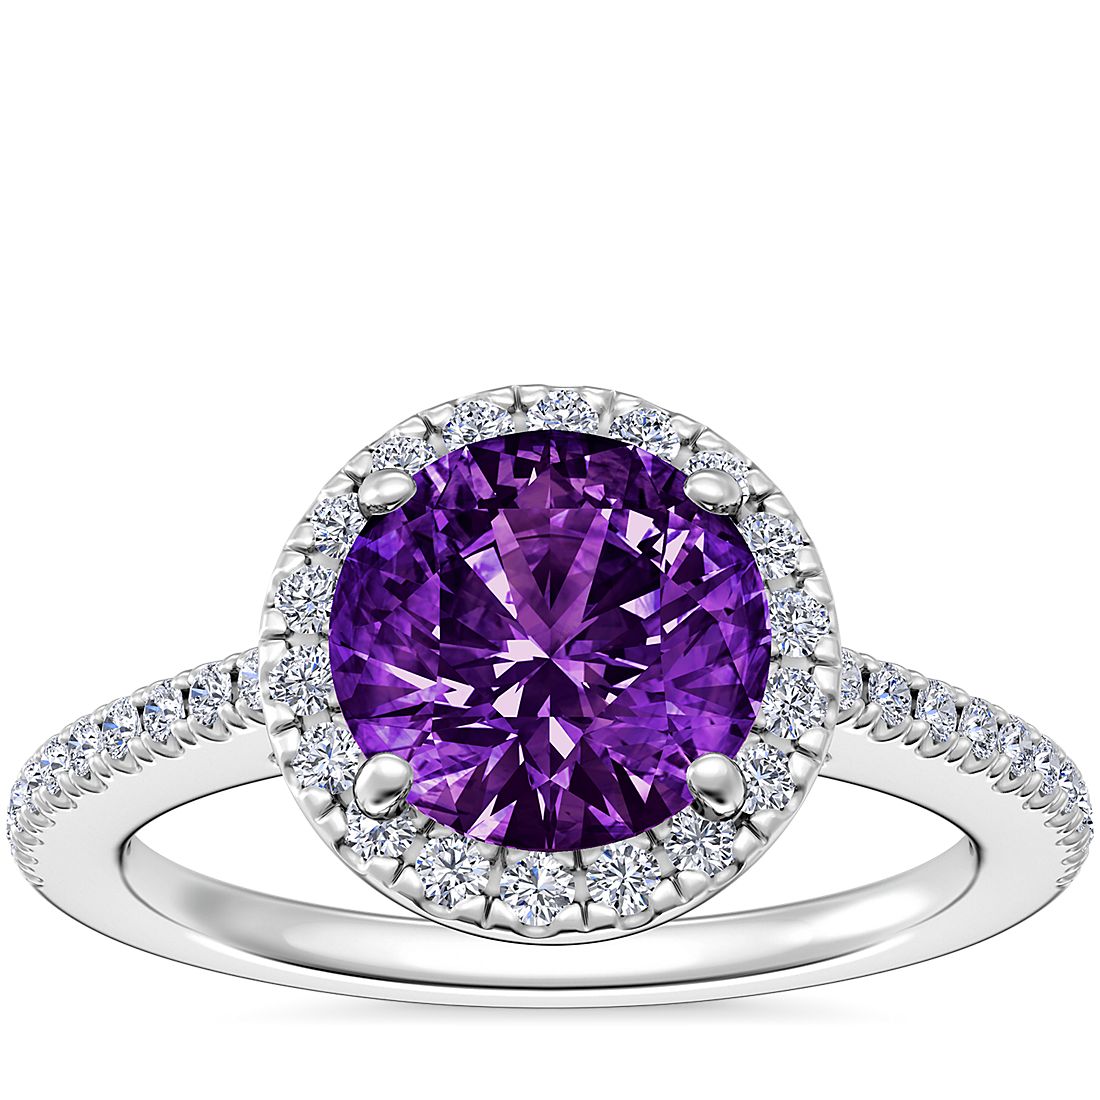 Classic Halo Diamond Engagement Ring with Round Amethyst in Platinum (8mm)